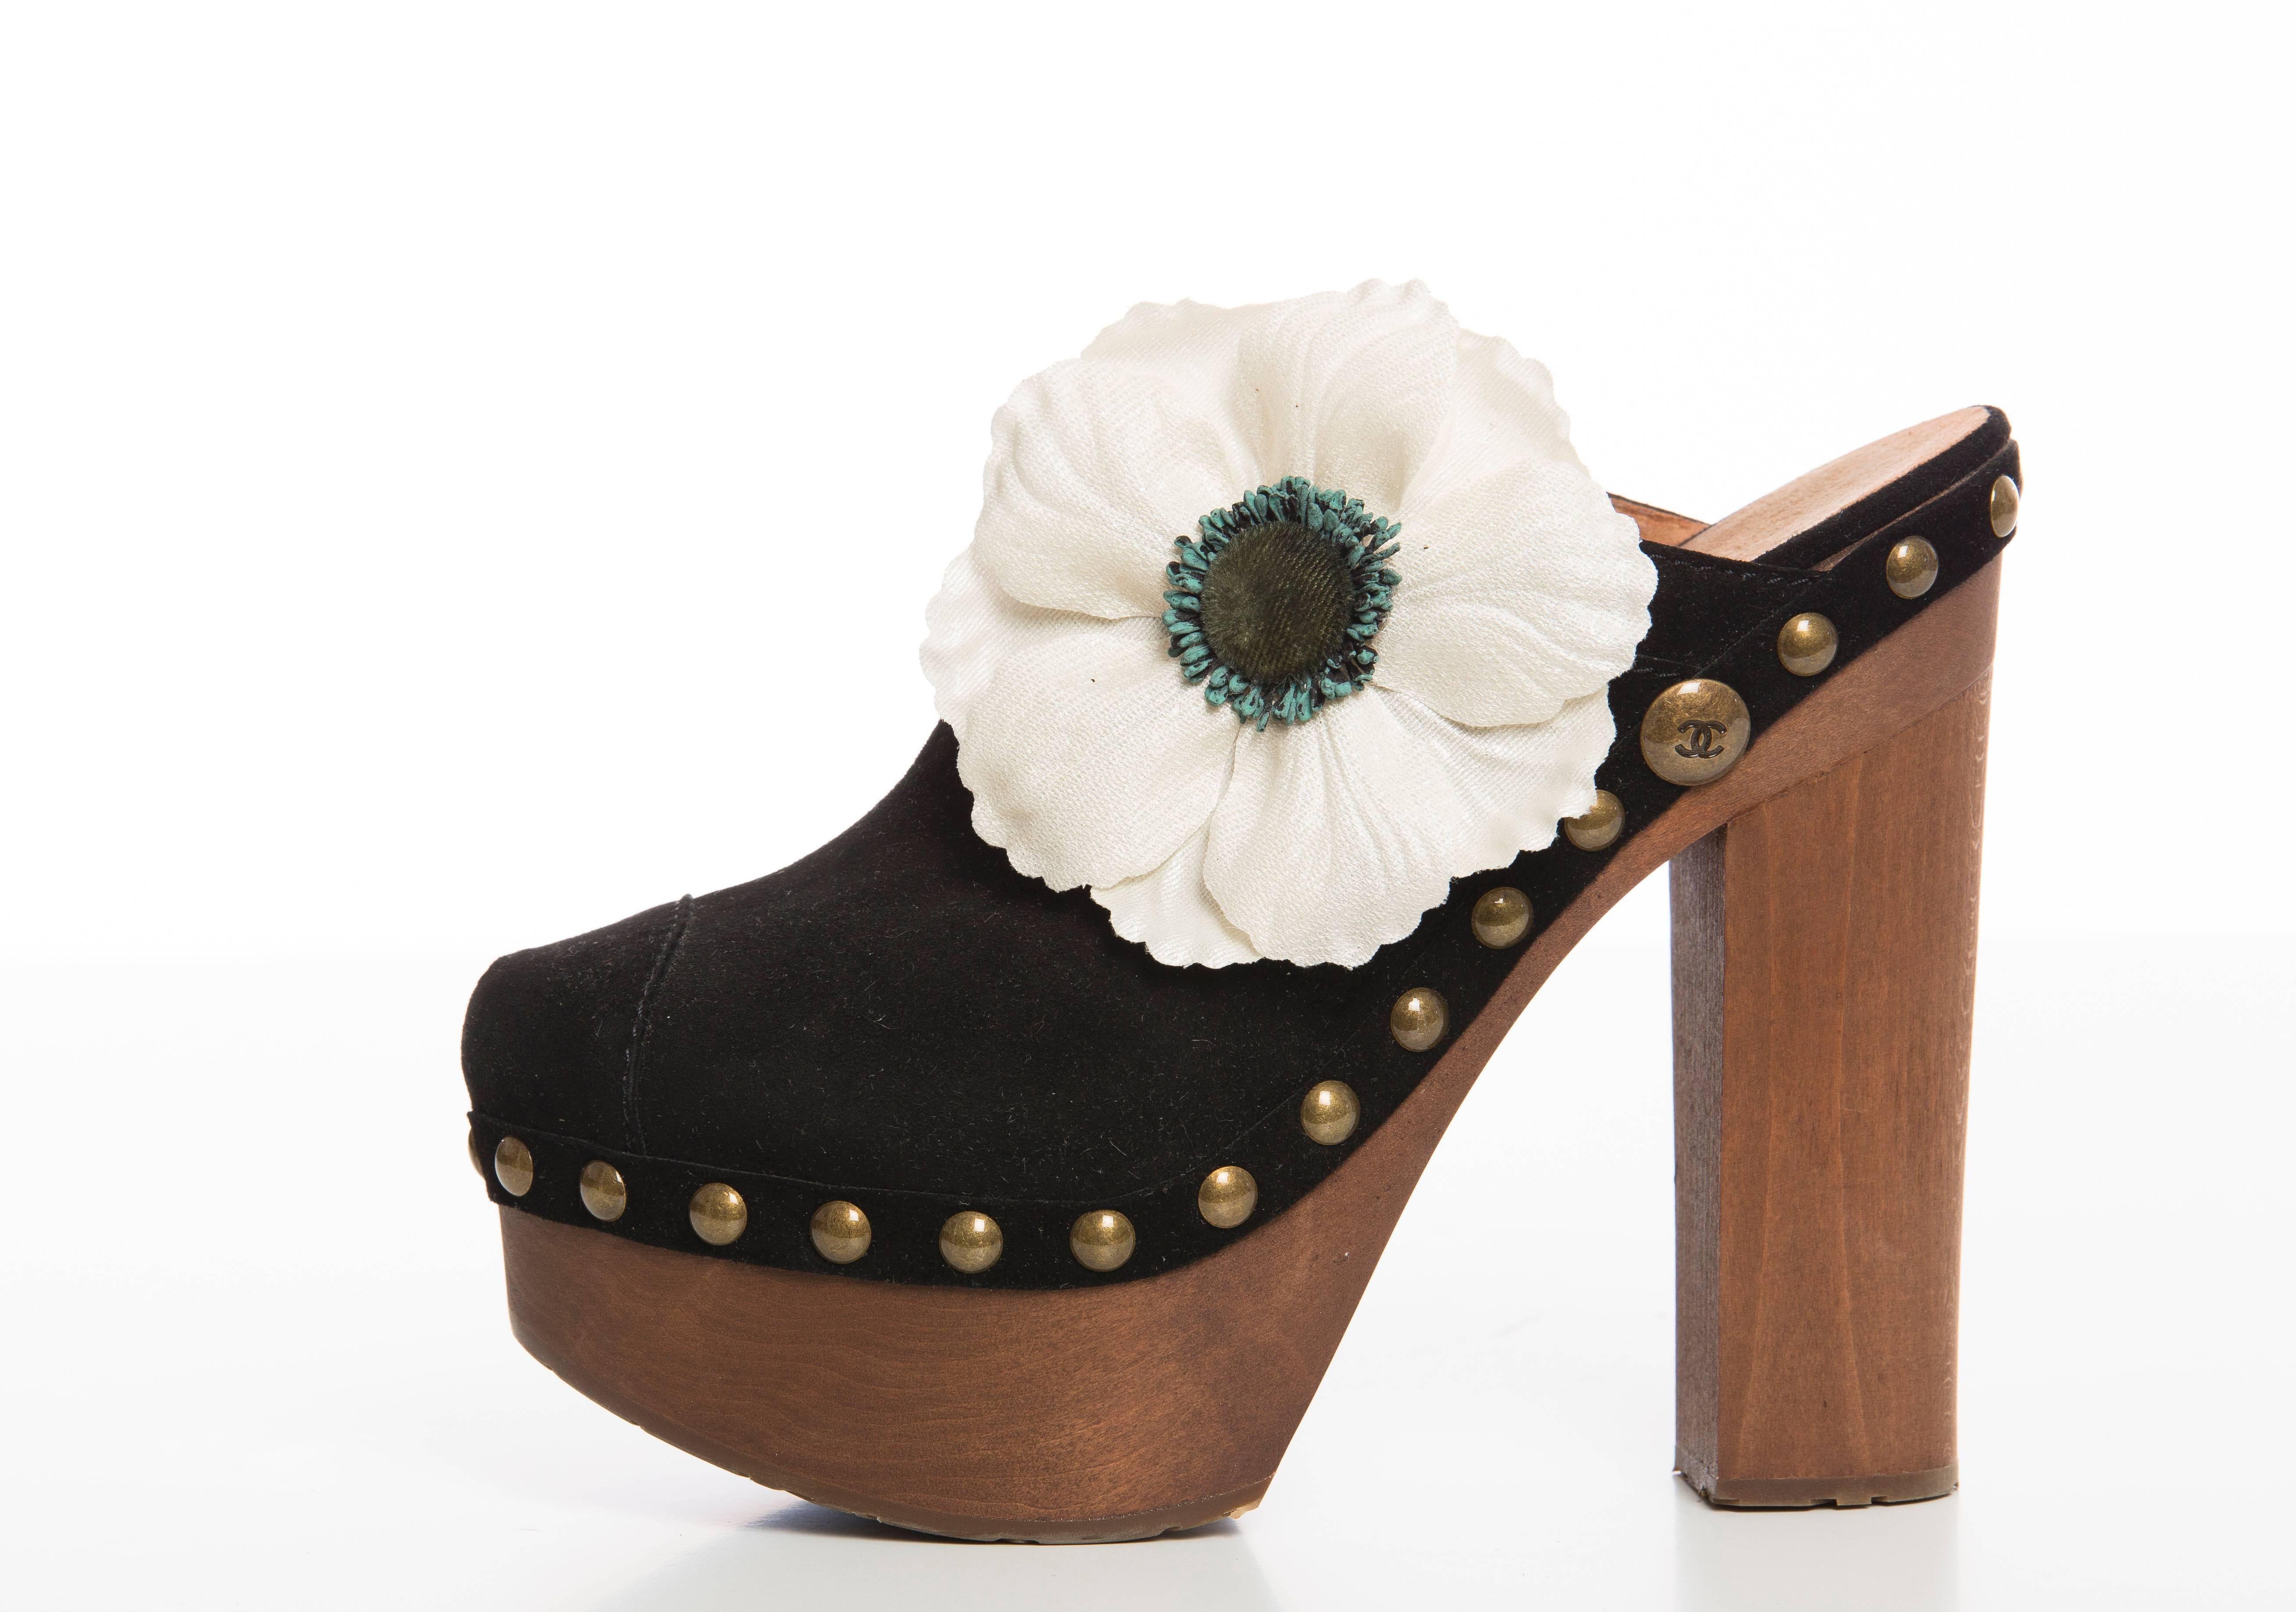 Chanel, Spring - Summer 2010 black suede and wood clogs with bronze studs and large appliqué camelia flower detail. New with box.